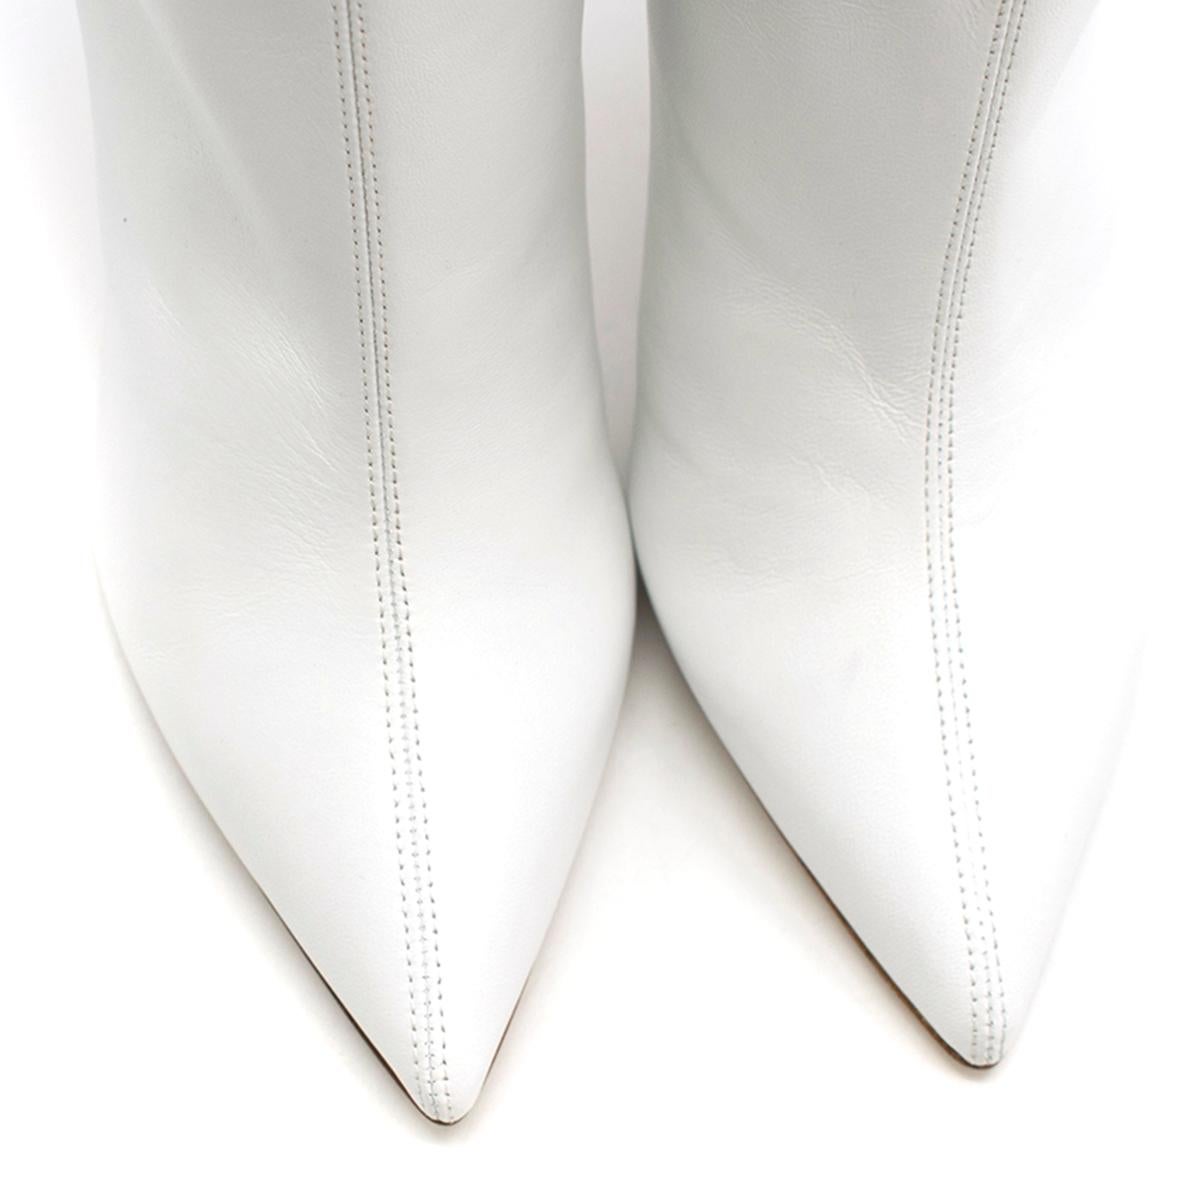 Malone Souliers Daisy 100 white leather ankle boots - Current Season US 9 In New Condition For Sale In London, GB